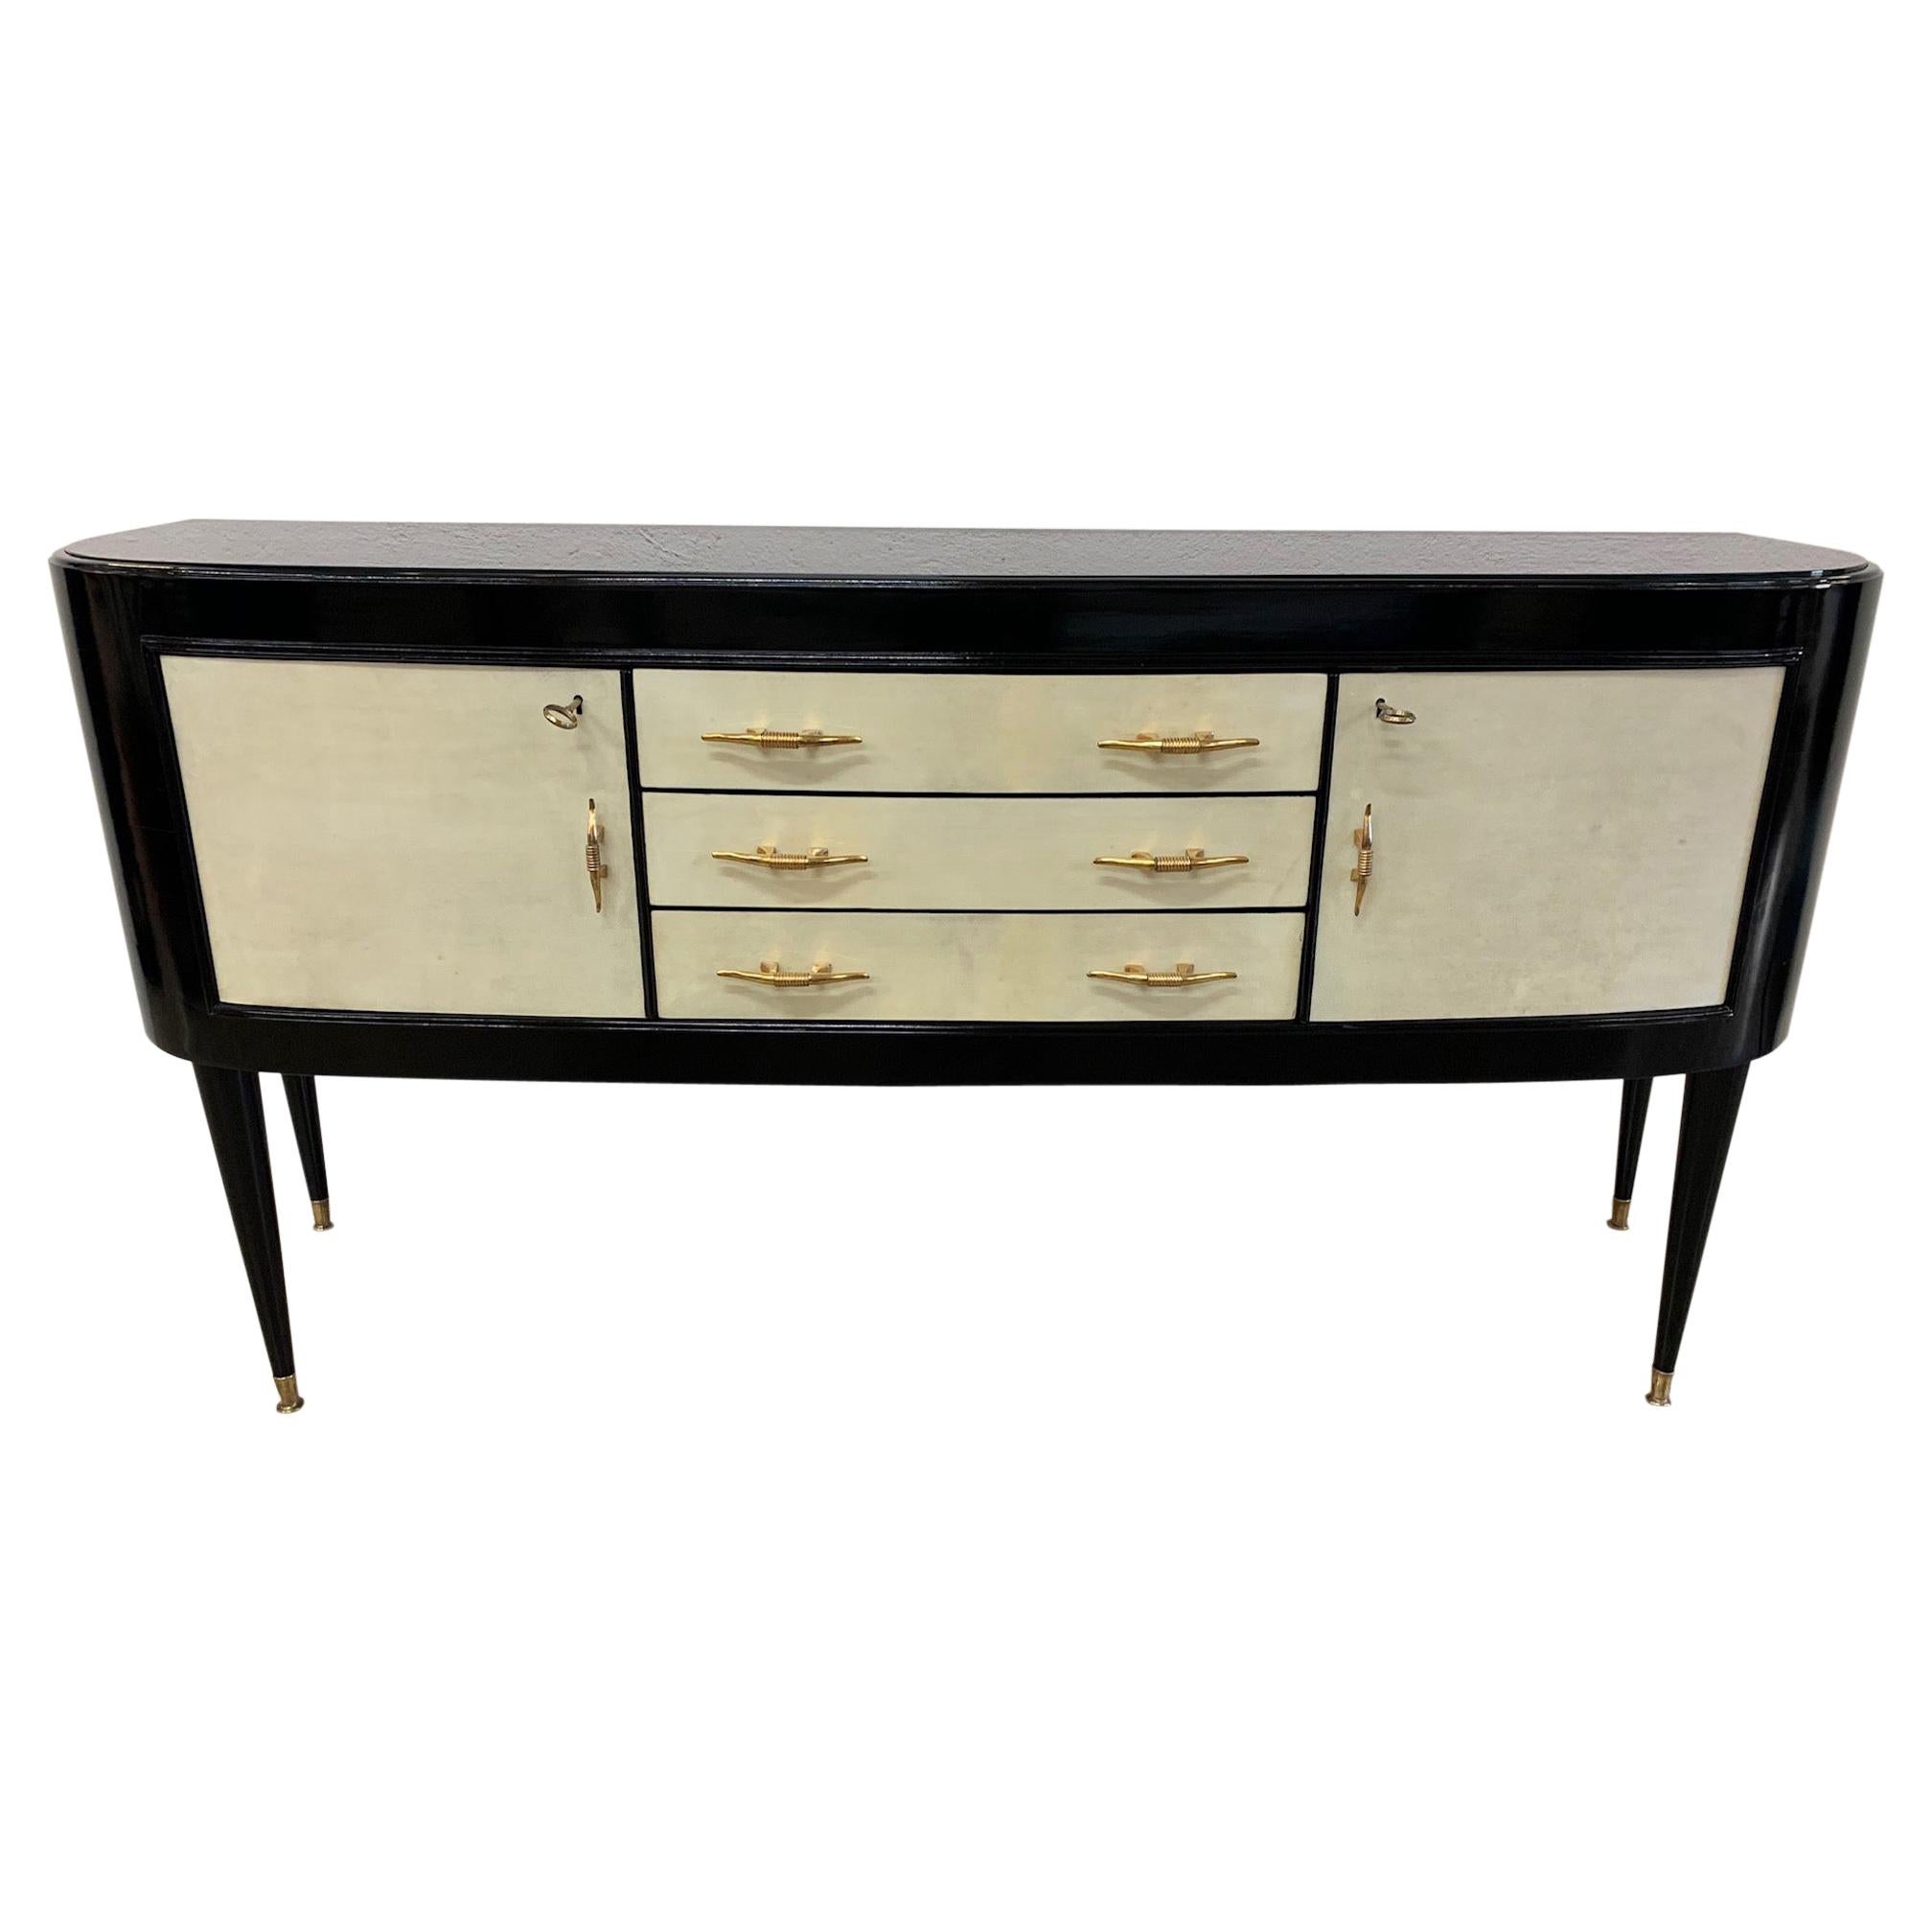 1940s Italian Black and Parchment Sideboard